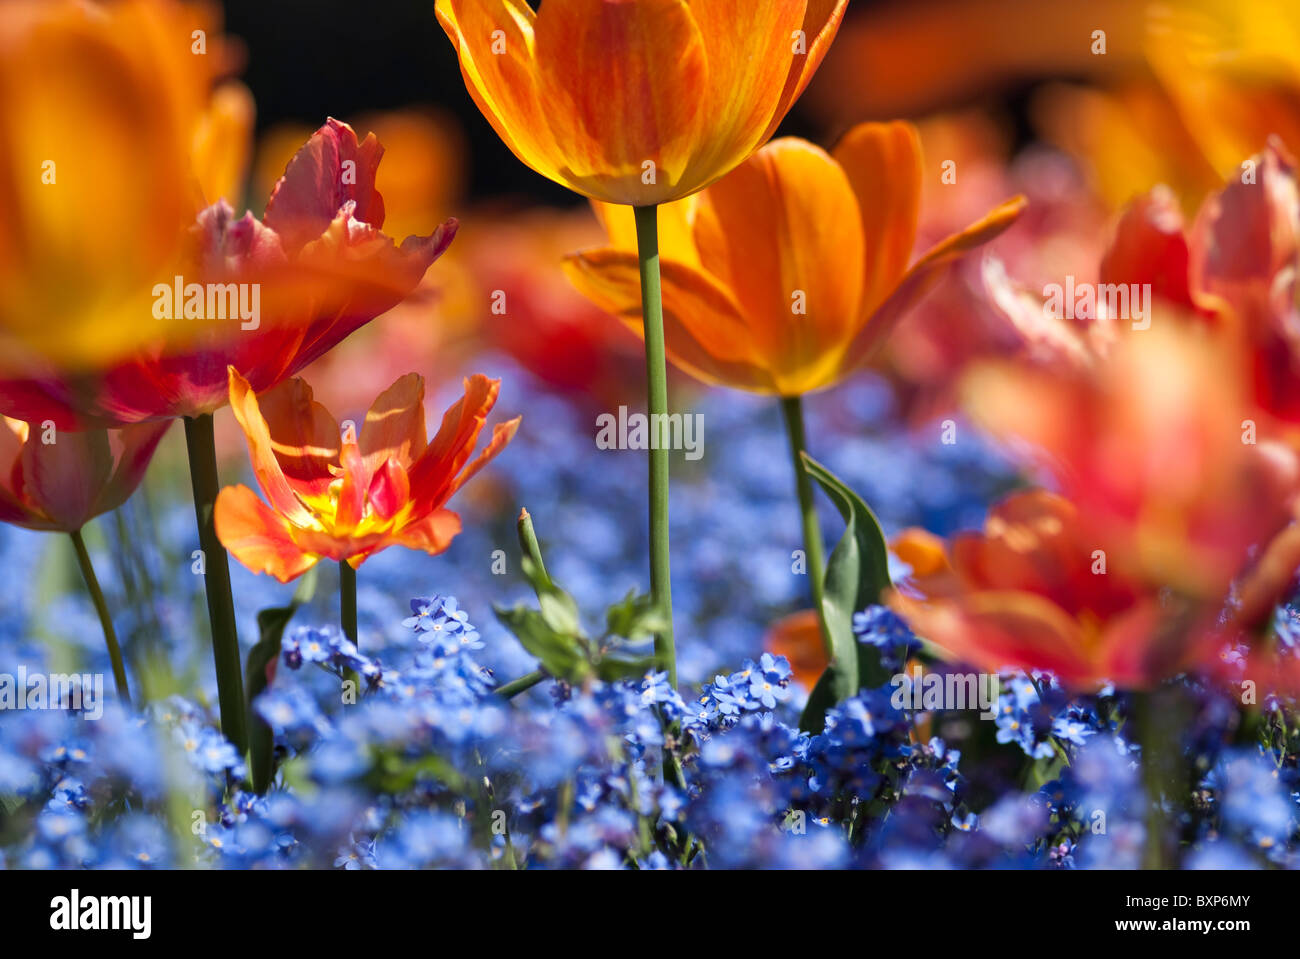 Orange tulips and forget-me-nots in Golders Hill Park Garden Stock Photo